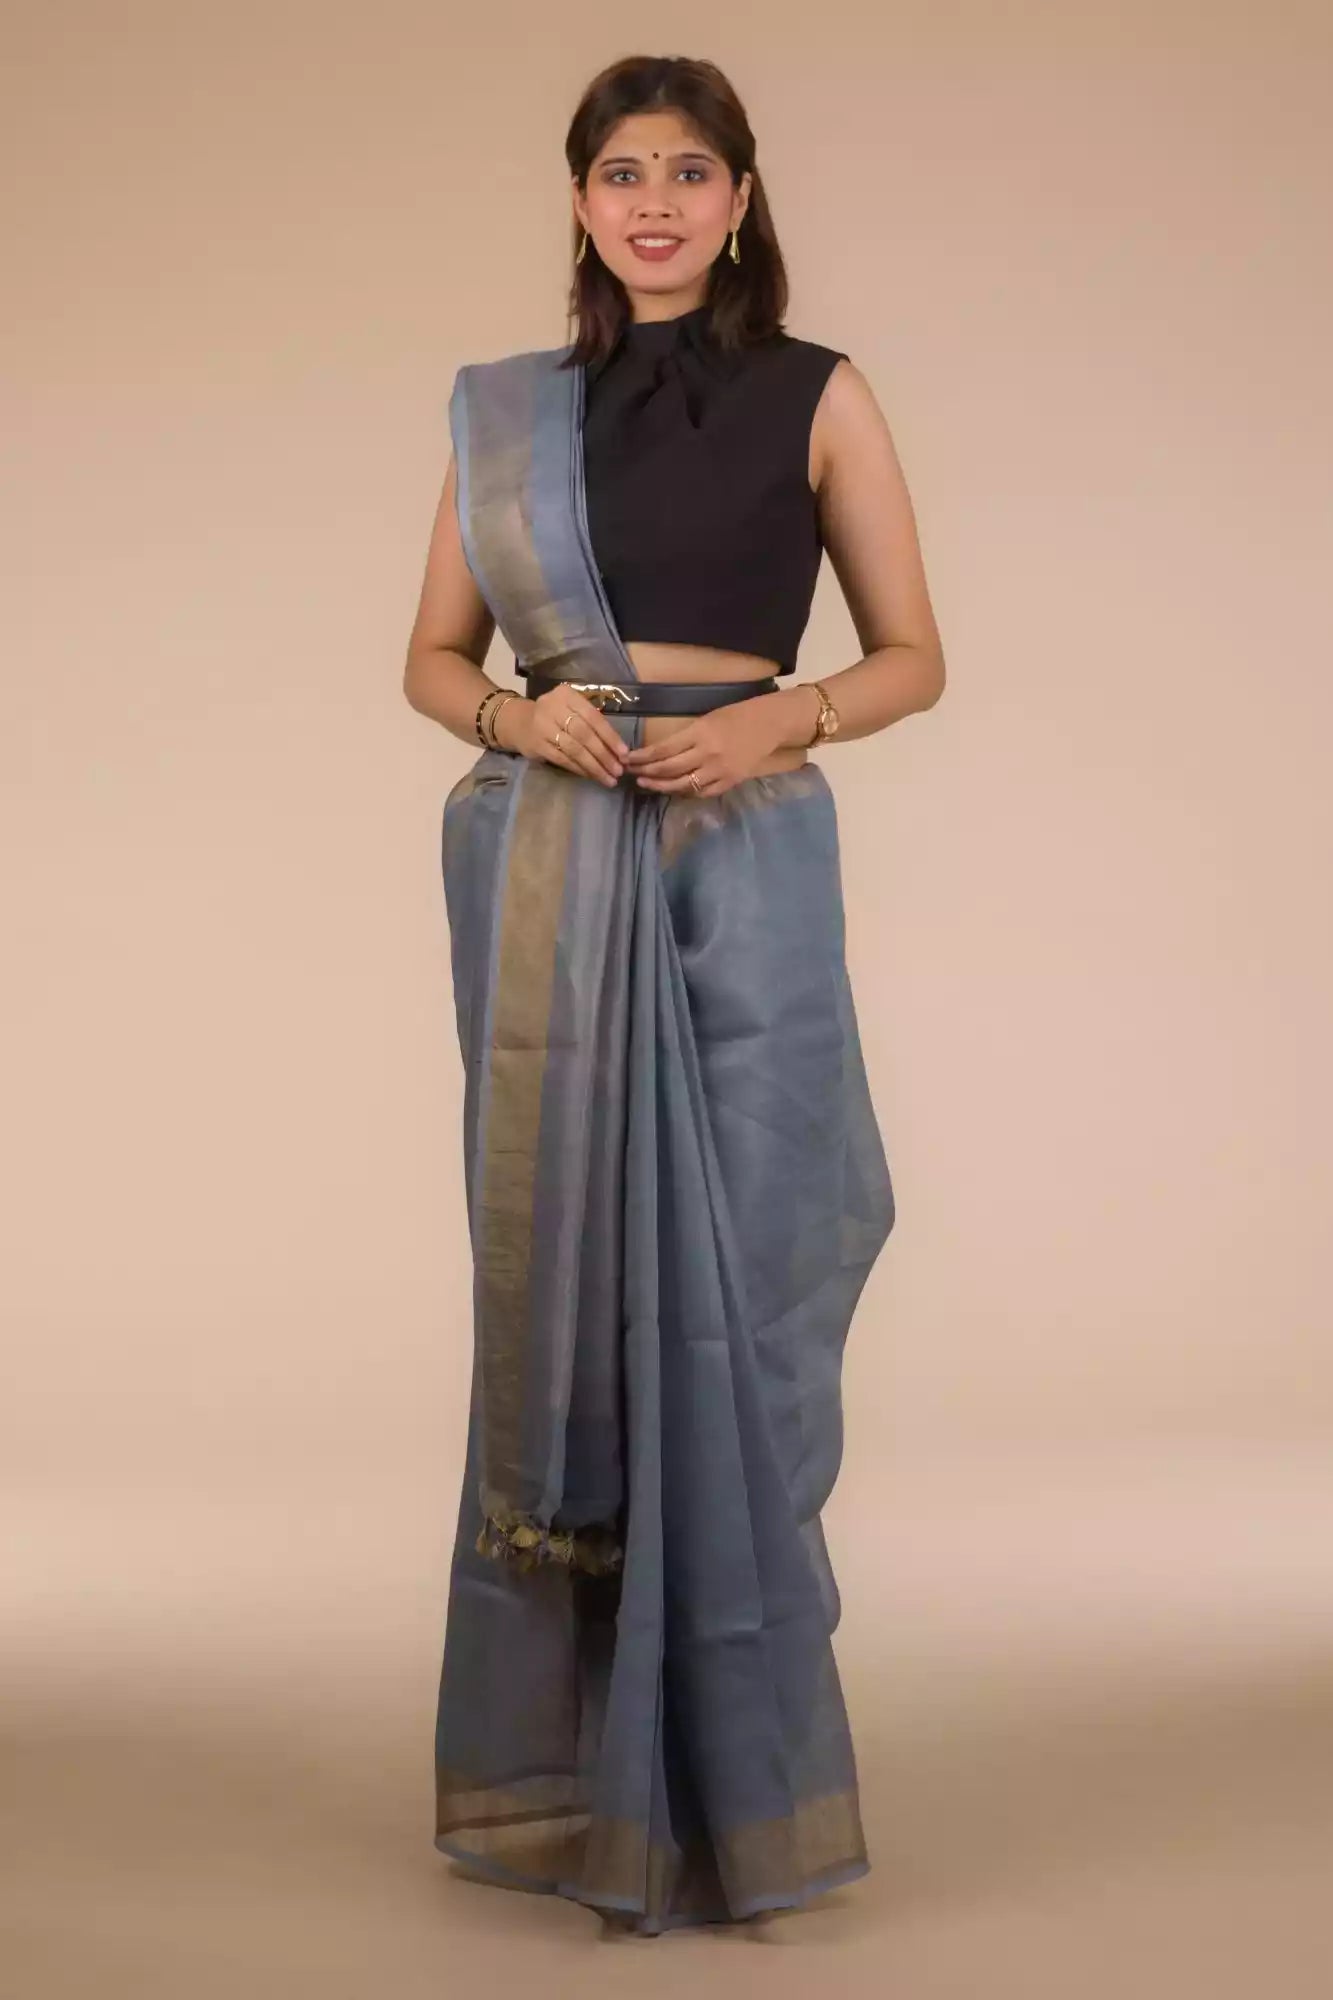 an image of a woman in a grey saree with dark colored sleeveless blouse and a belt around her waist